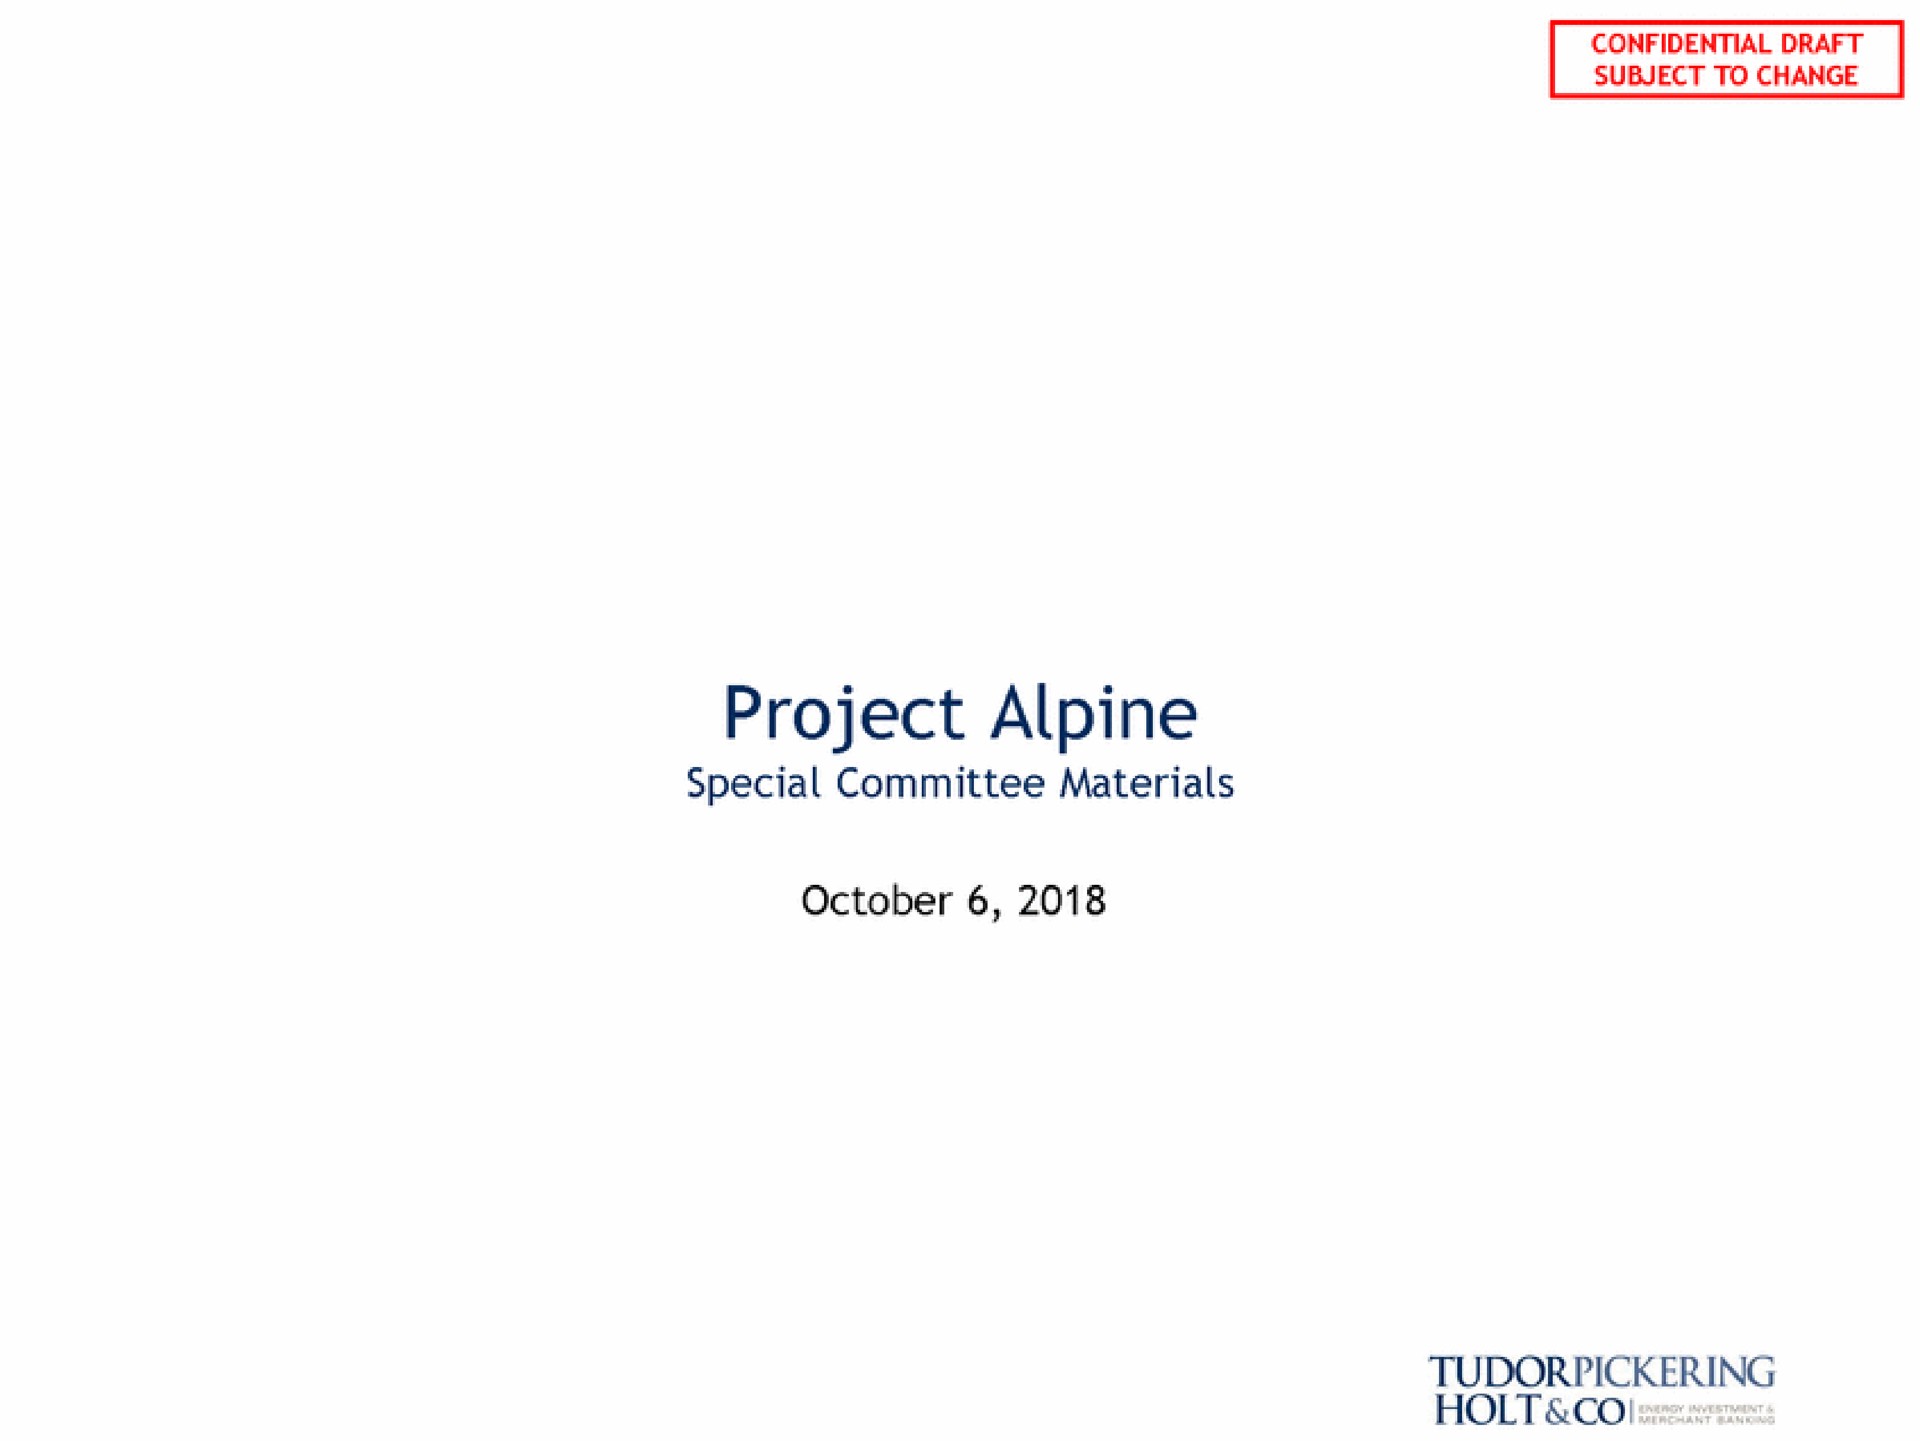 project alpine special committee materials holt | Tudor, Pickering, Holt & Co